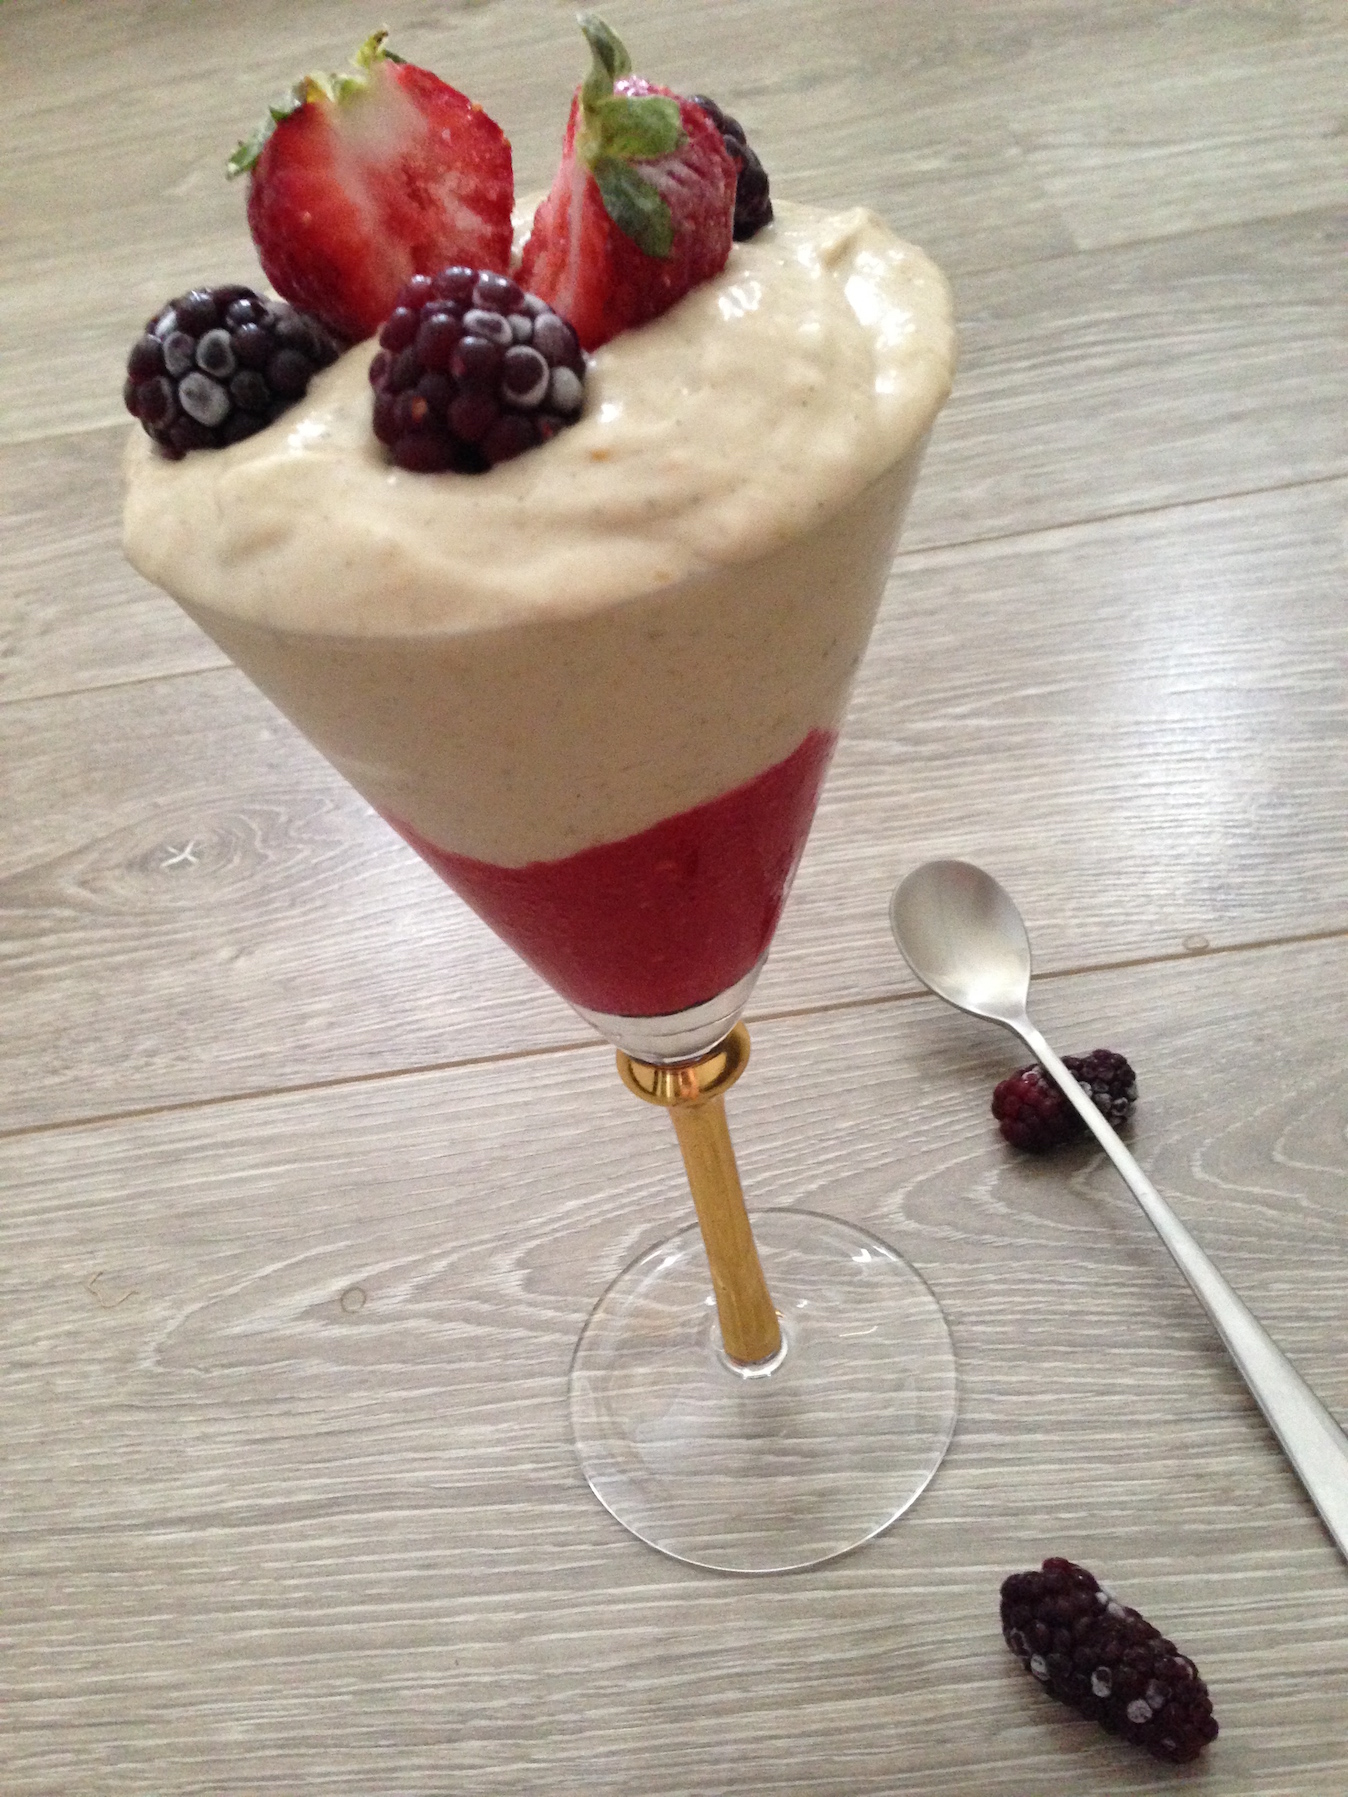 banana and berry nice cream layered in a fancy glass